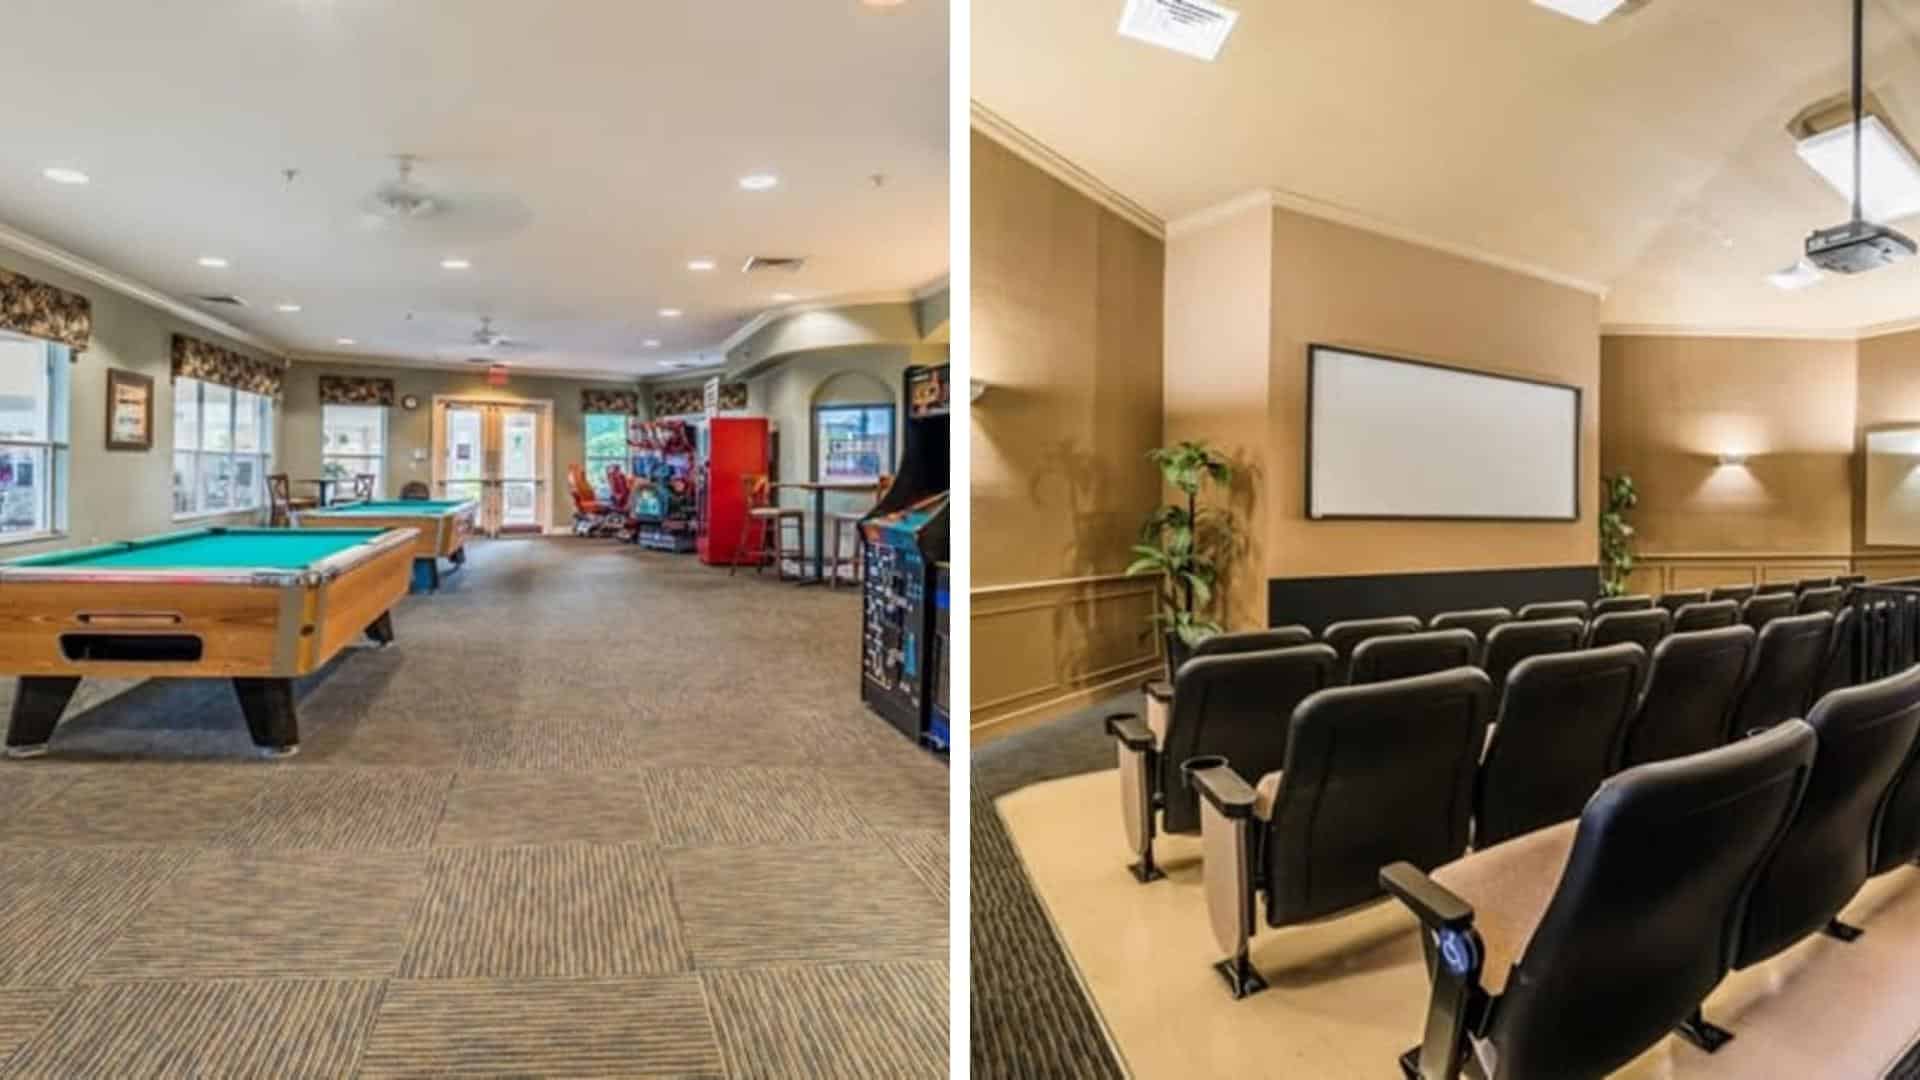 Indoor Amenities at Windsor Hills - Game Room and Movie Theater